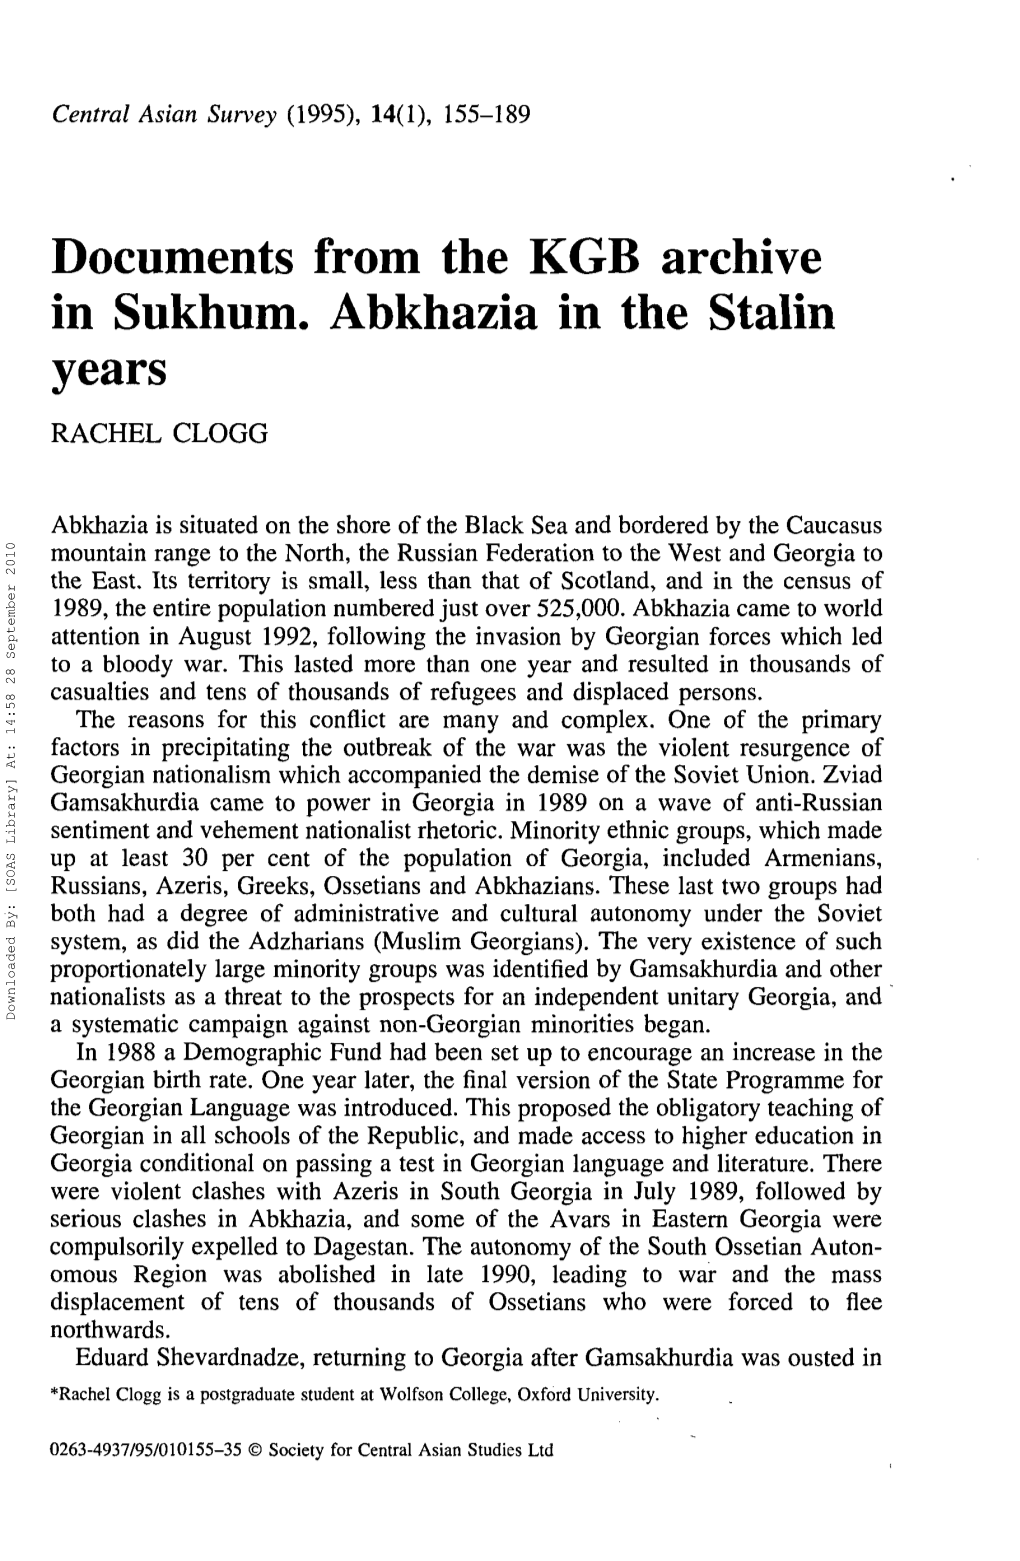 Documents from the KGB Archive in Sukhum. Abkhazia in the Stalin Years RACHEL CLOGG